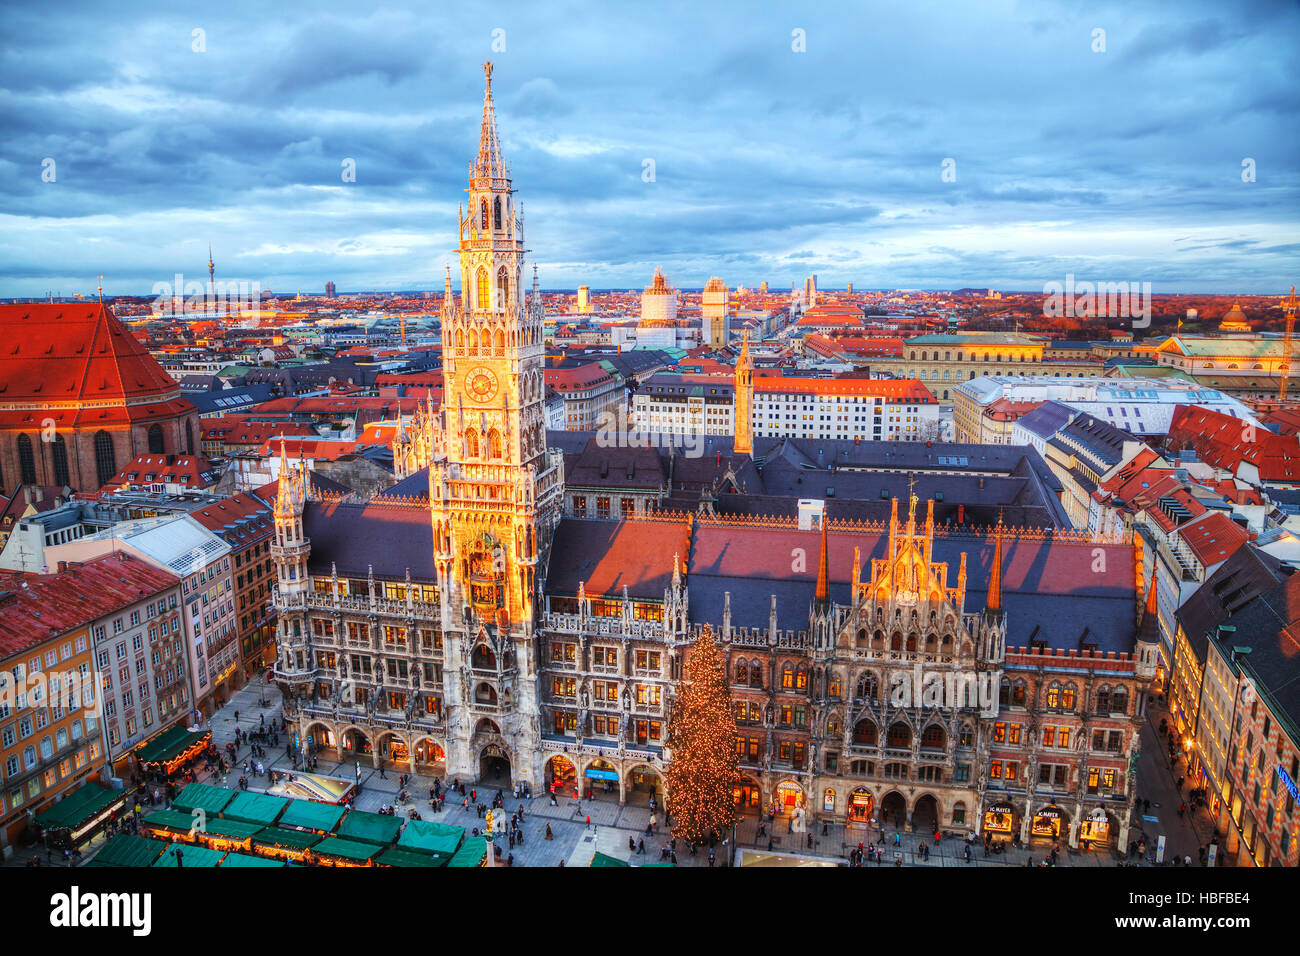 MUNICH - NOVEMBER 30: Aerial view of Marienplatz on November 30, 2015 in Munich. It's the 3rd largest city in Germany, after Berlin and Hamburg Stock Photo